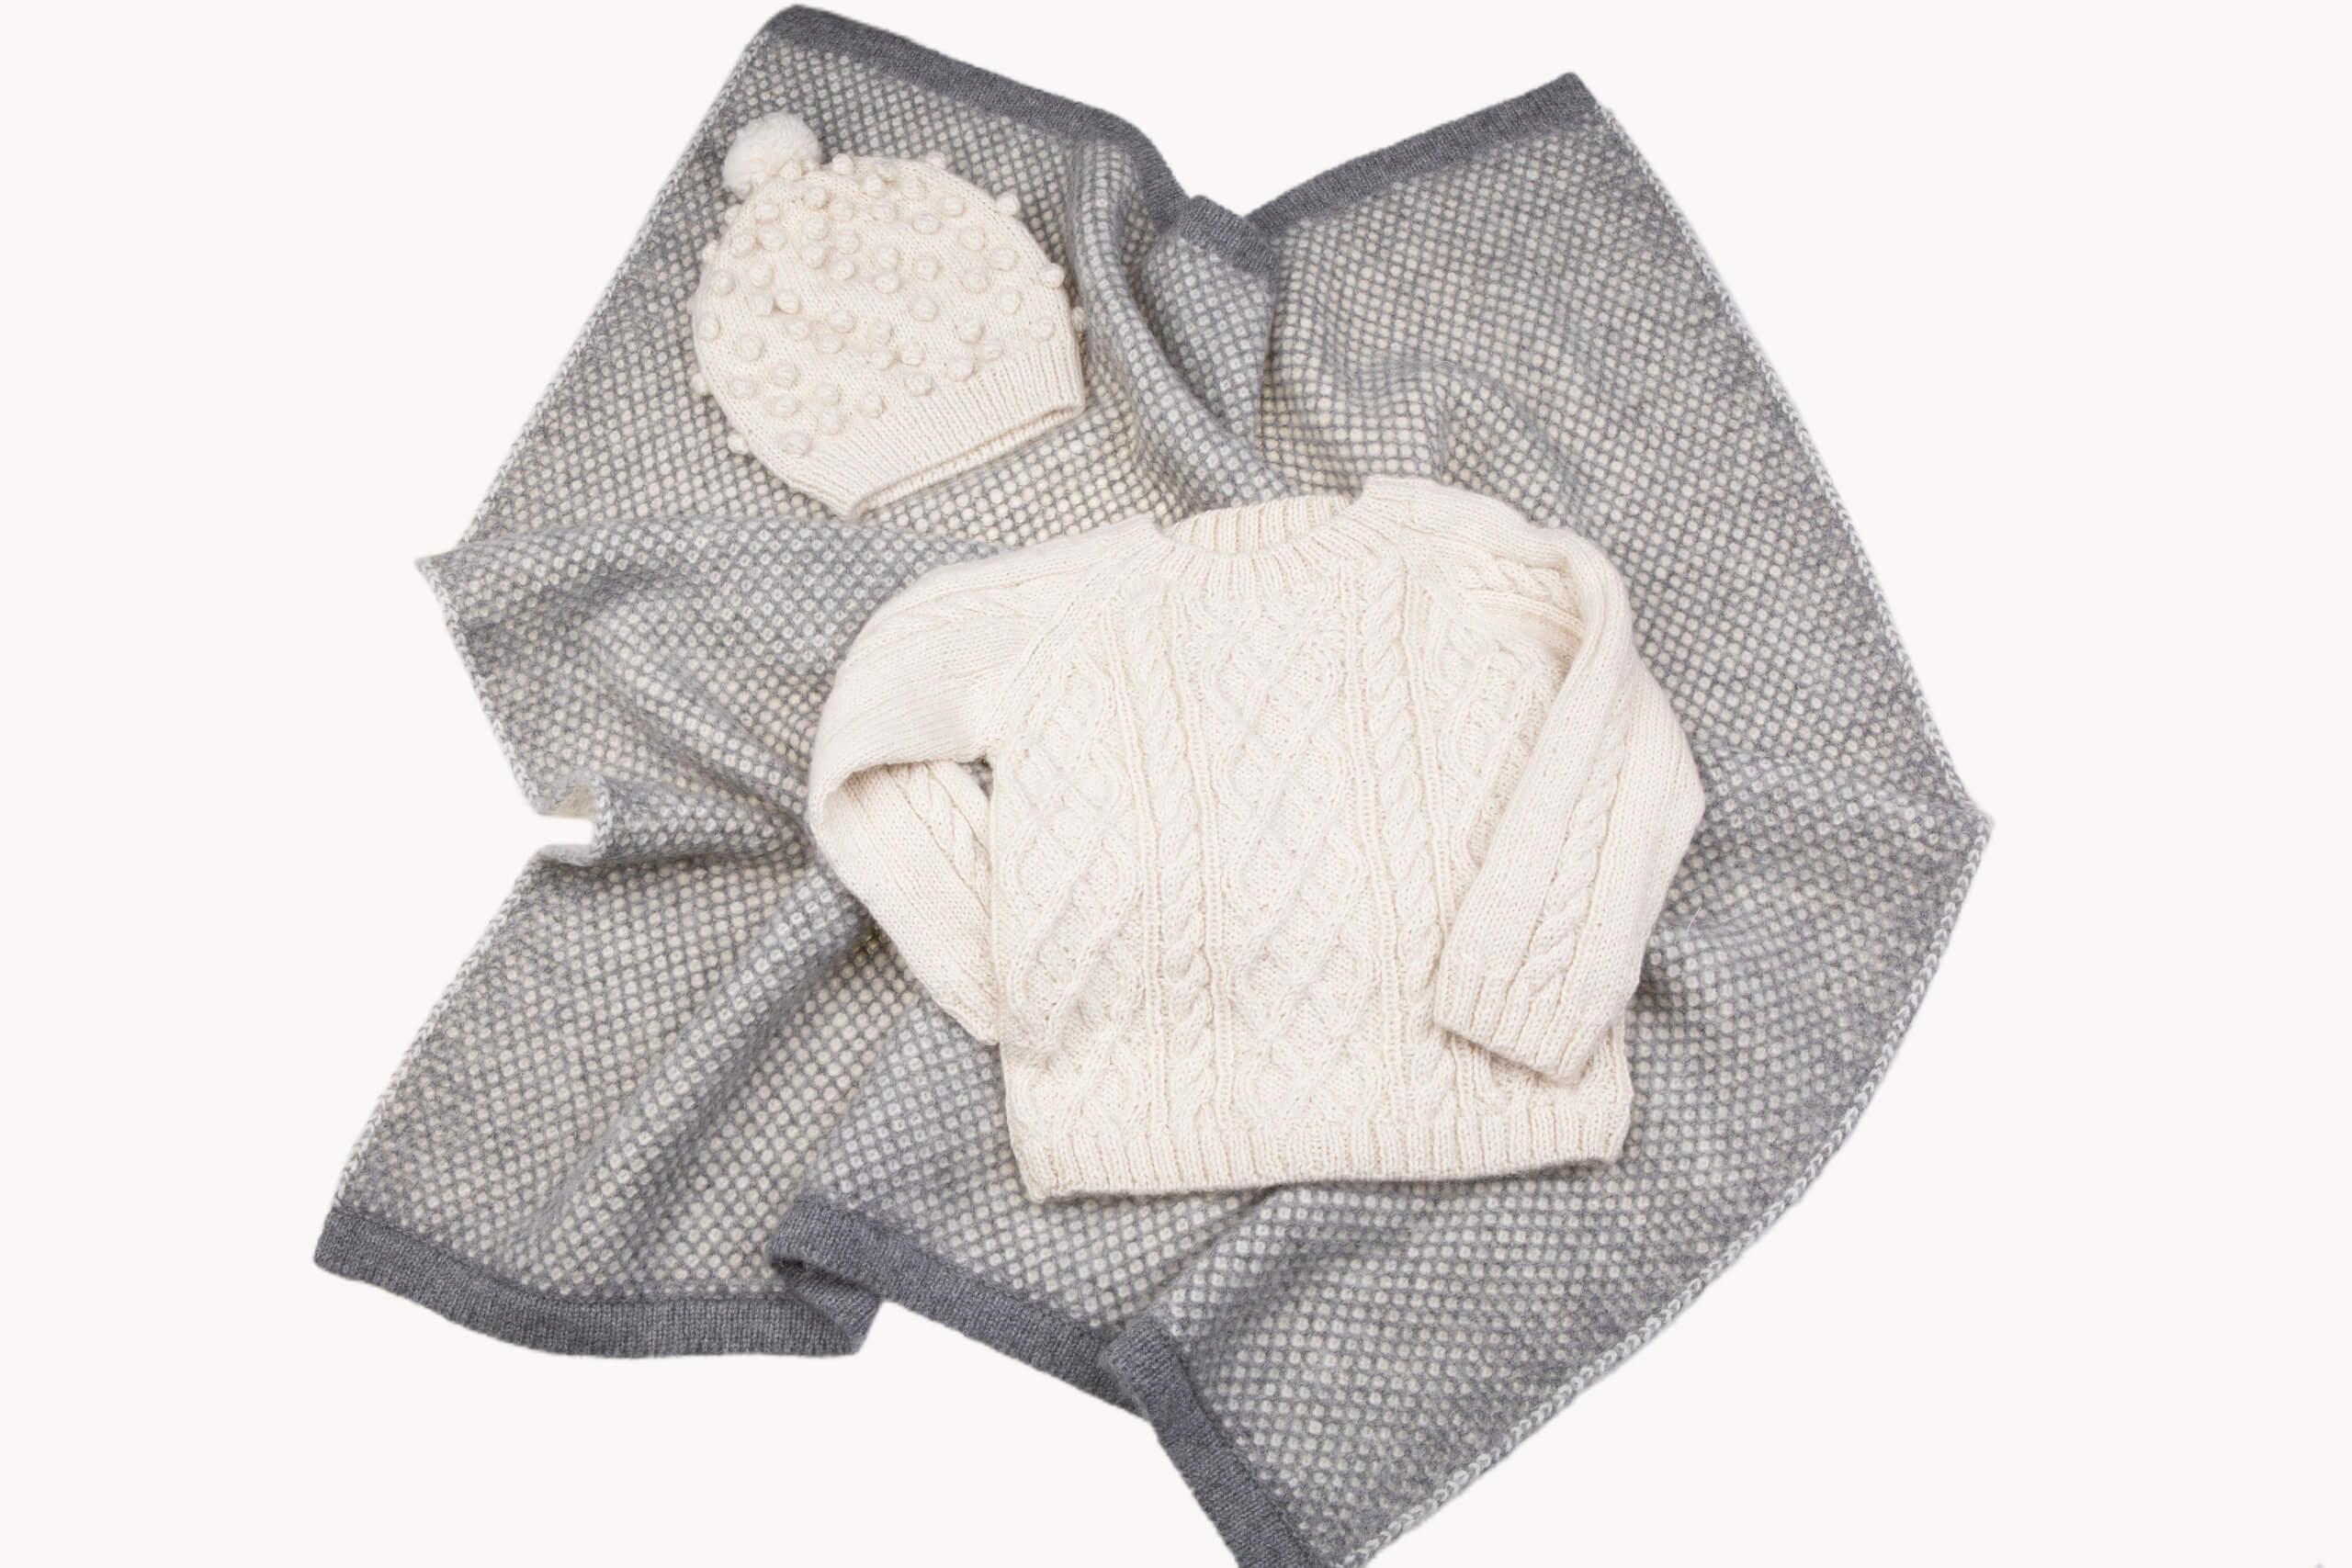 Gift Ideas - The Tuwi Baby Blanket, Baby Hat, and Alpaca Wool Sweater Gift Set